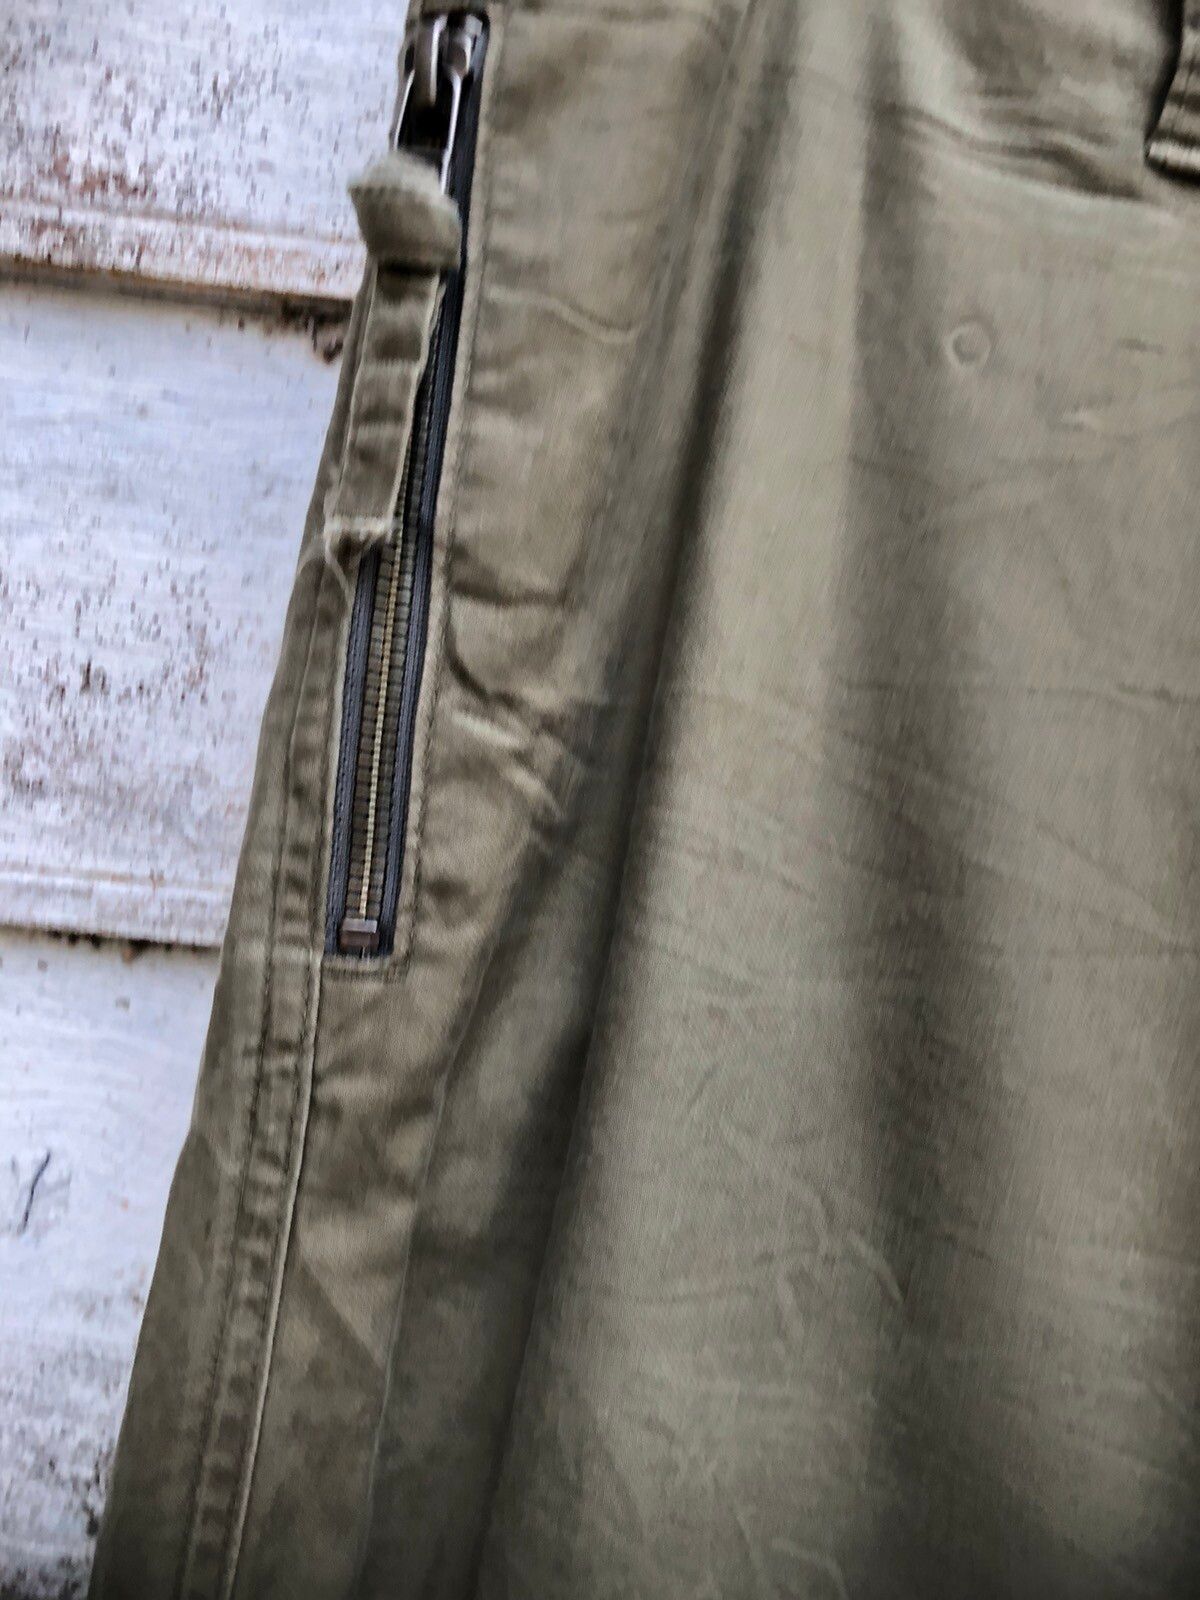 N. Hollywood Military Issues Trouser - 8